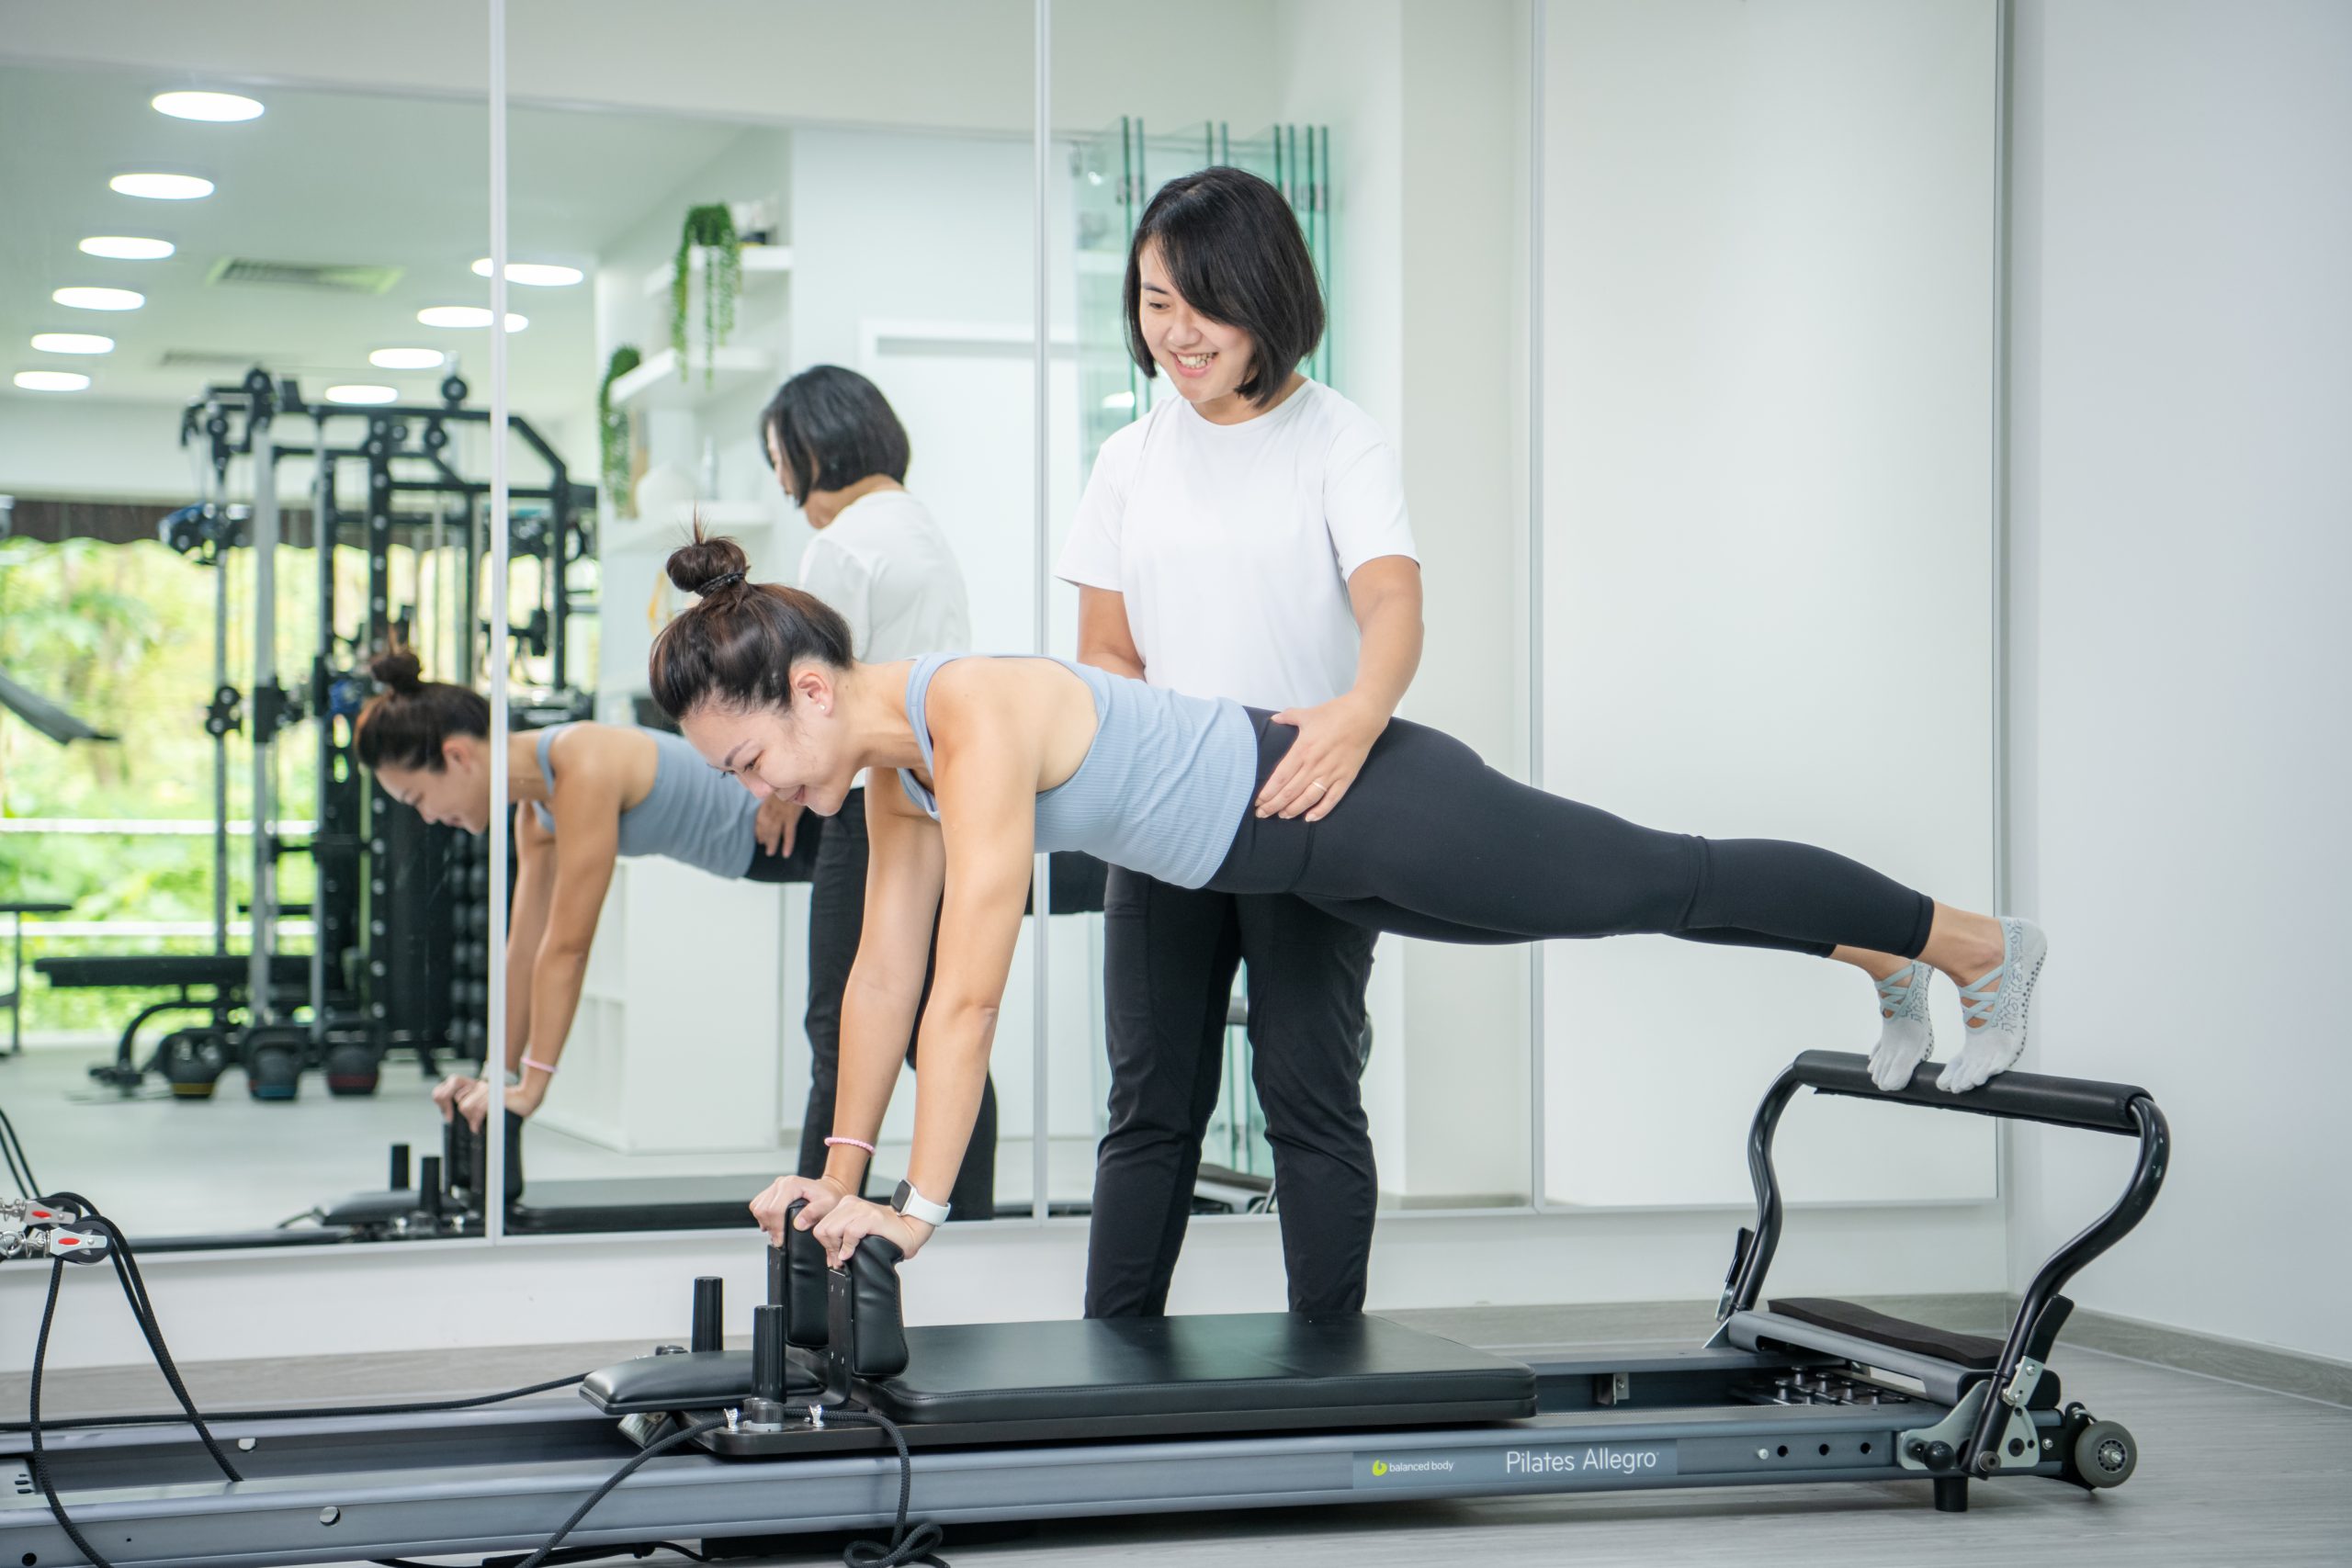 What is Pilates and in what conditions can it be beneficial for